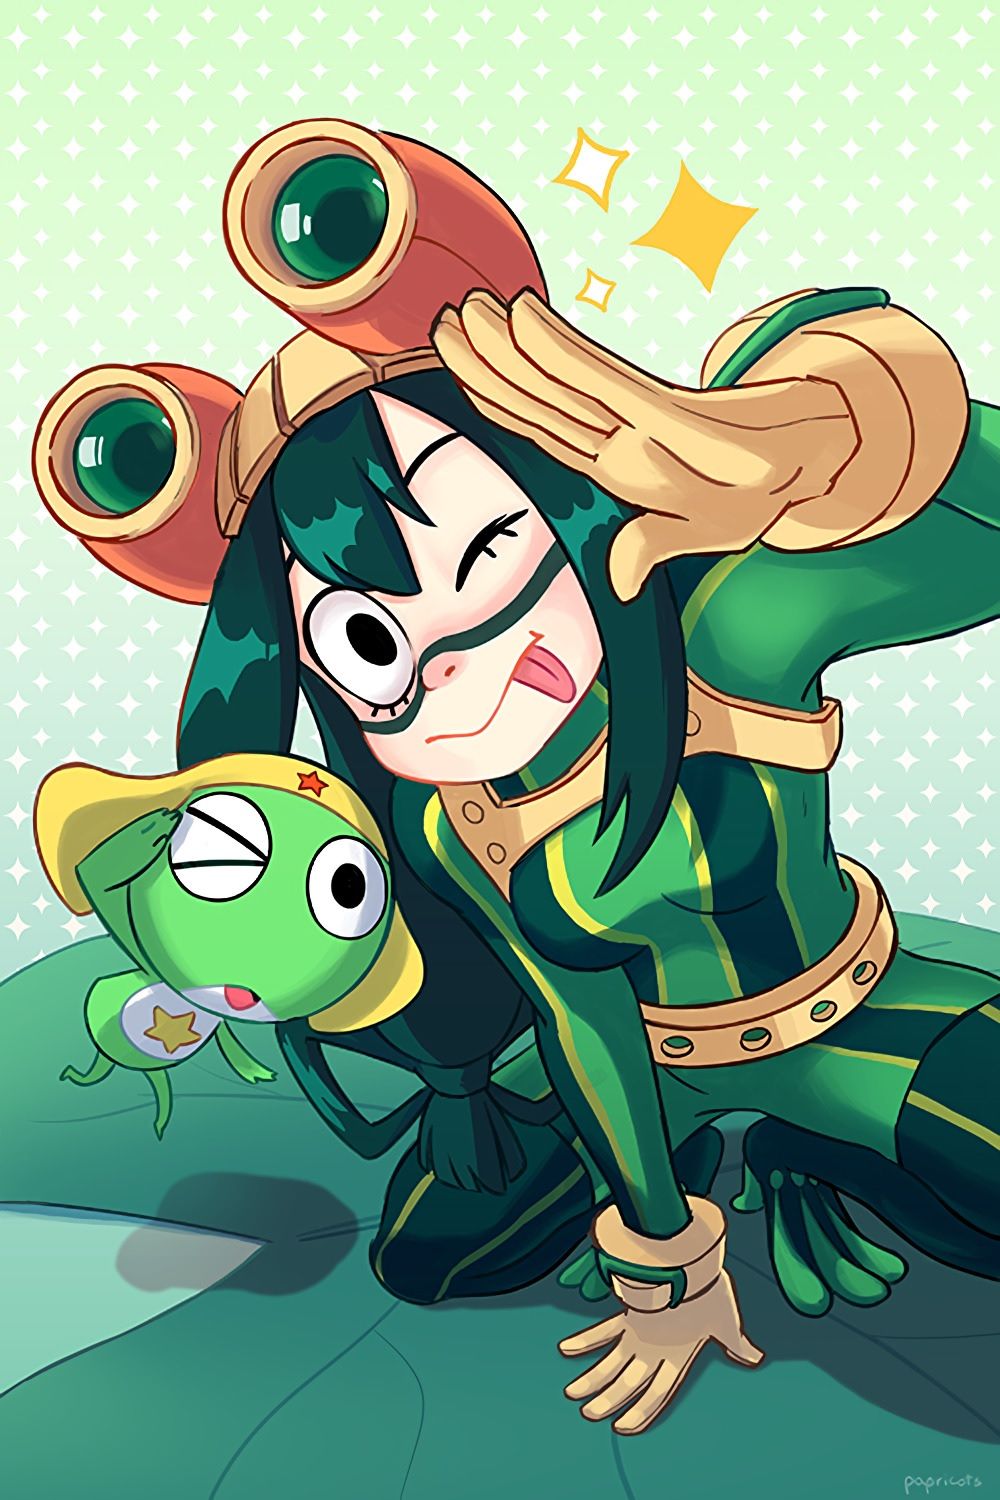 Tsuyu Asui and the main character from Sgt. Frog fan art by papricots on DeviantArt